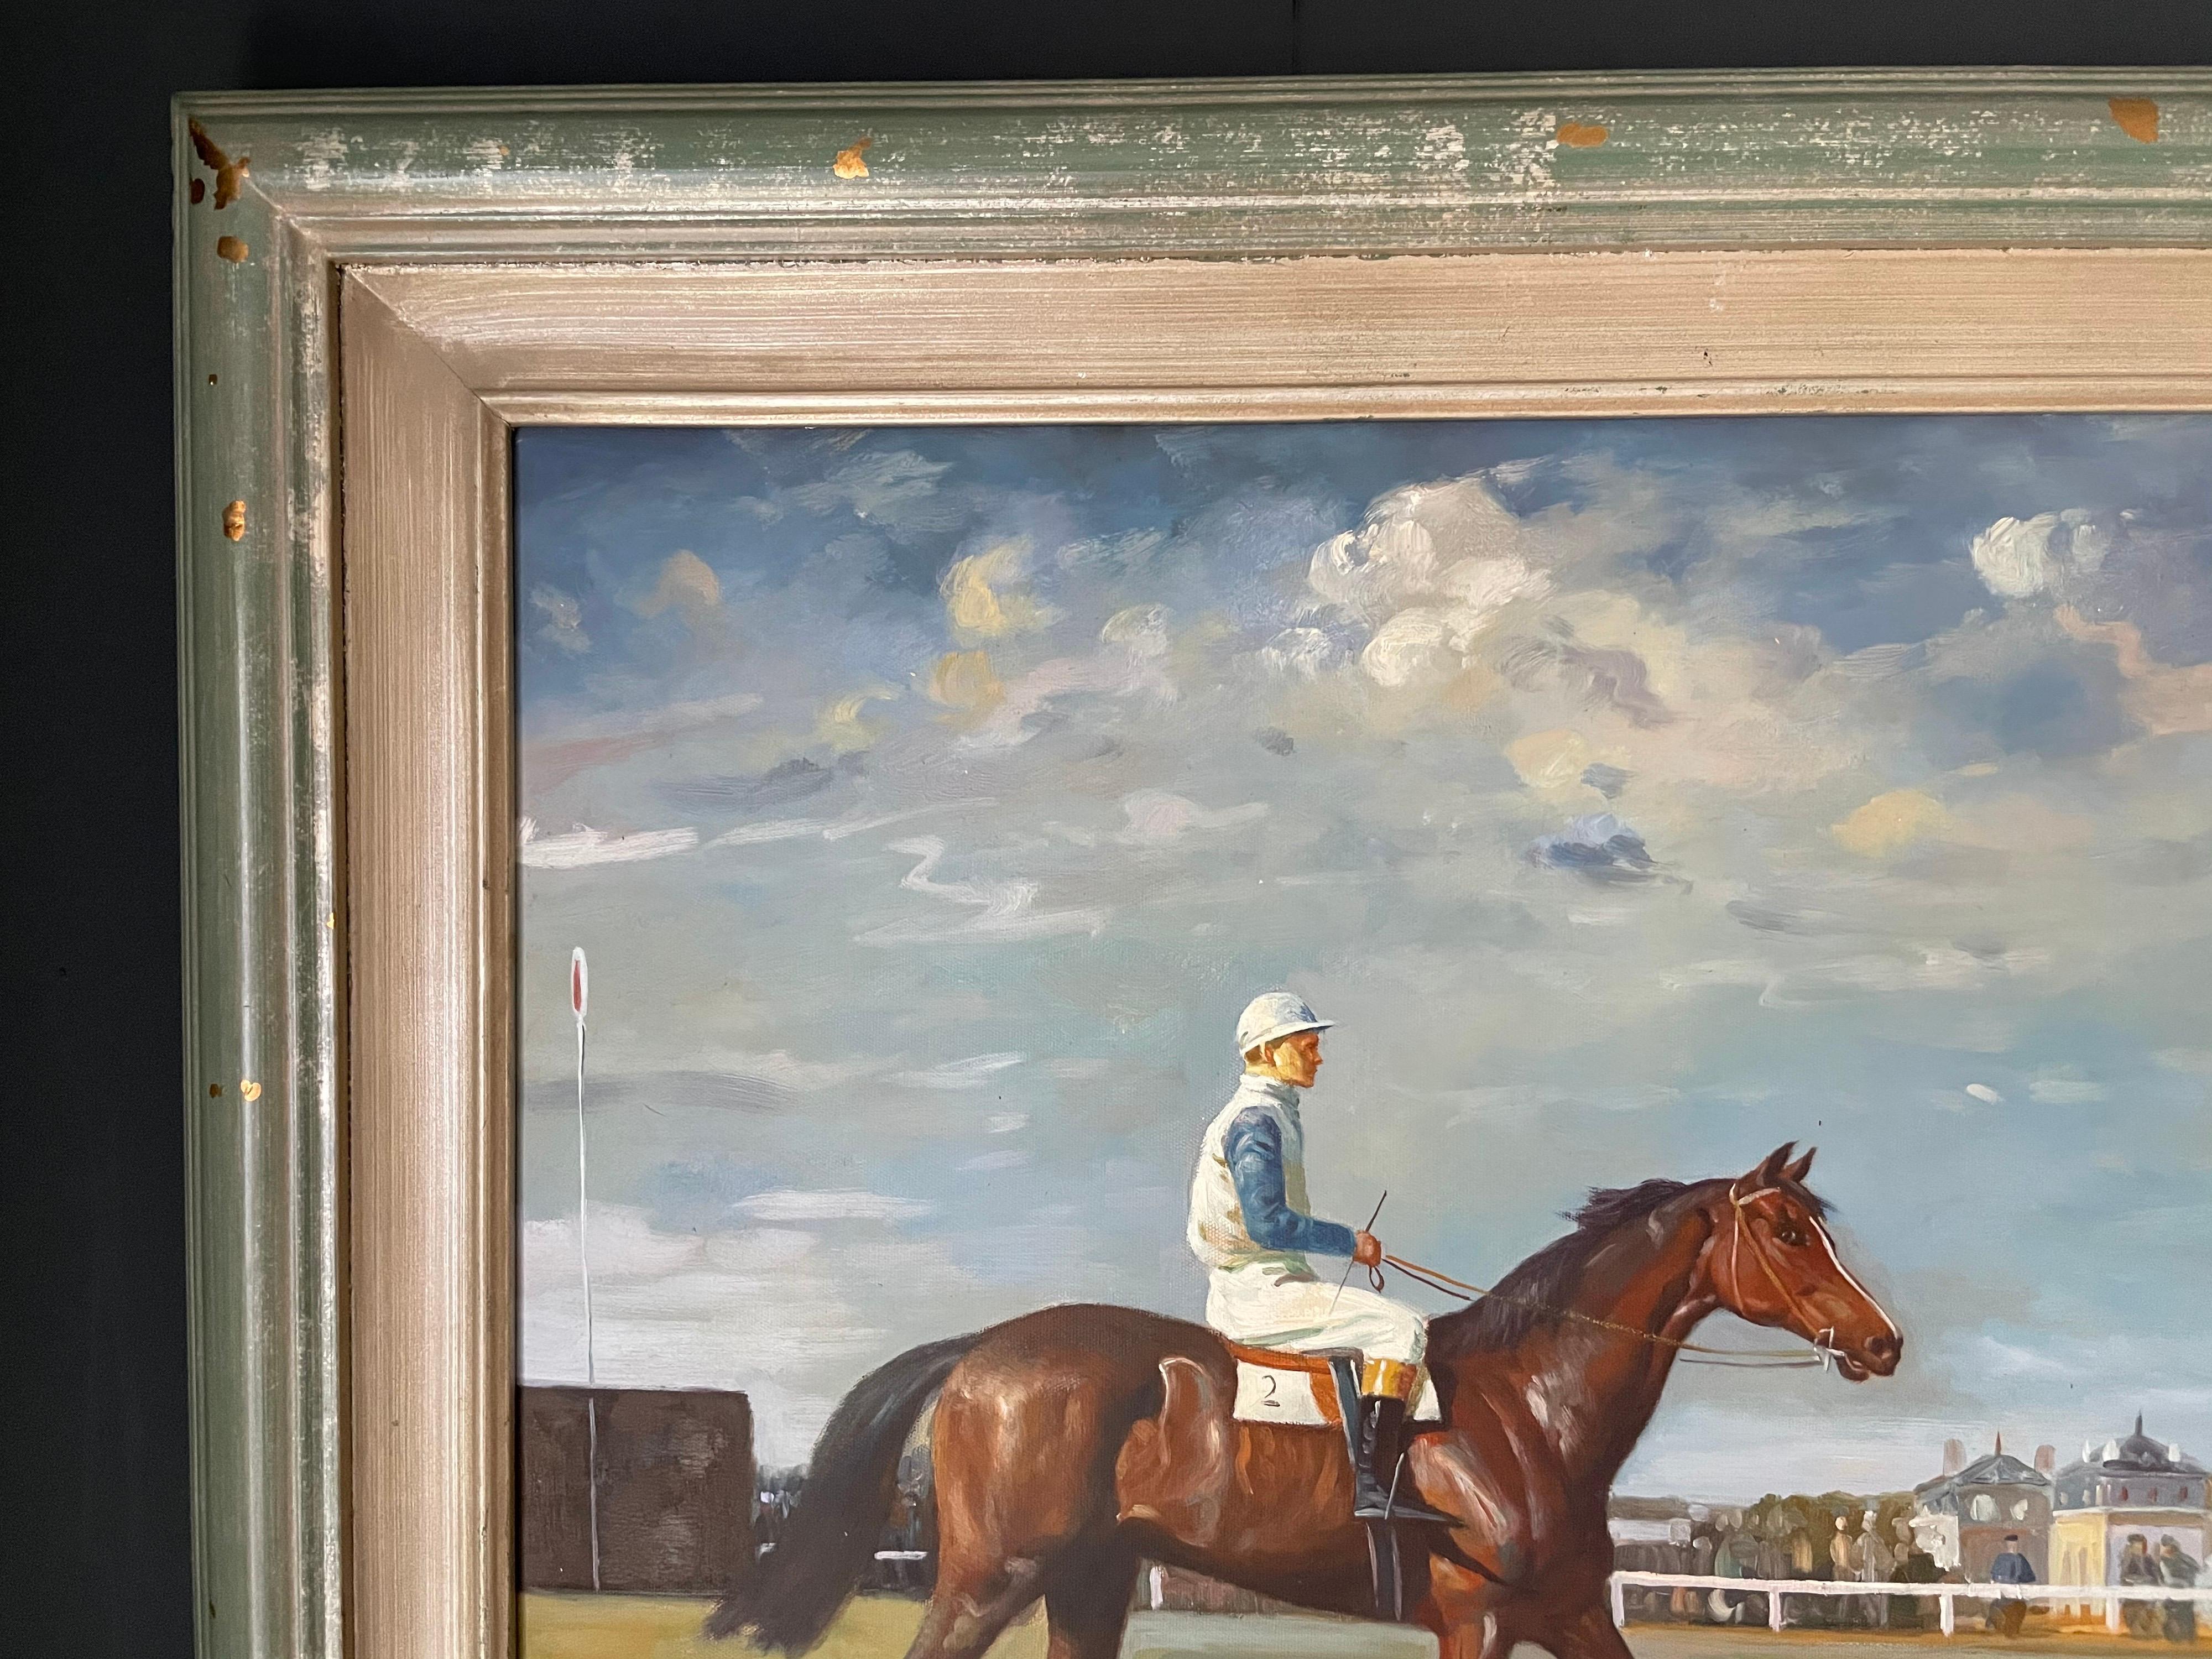 Racehorse with Jockey Up Parading at Racecourse Fine British Impressionist Oil - Gray Landscape Painting by Jack Leyine